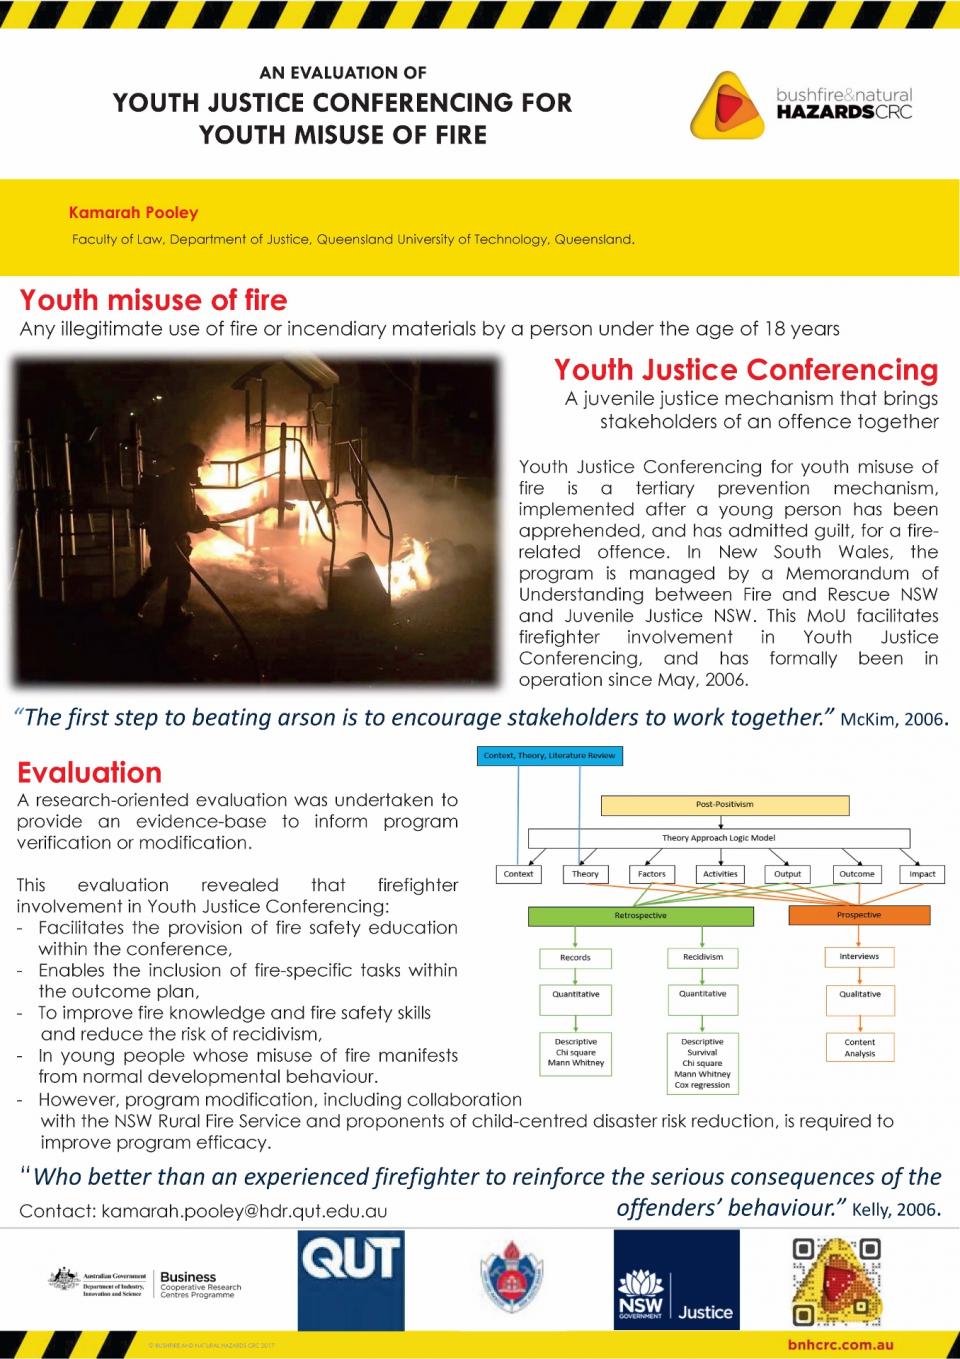 An evaluation of youth justice conferencing for youth misuse of fire